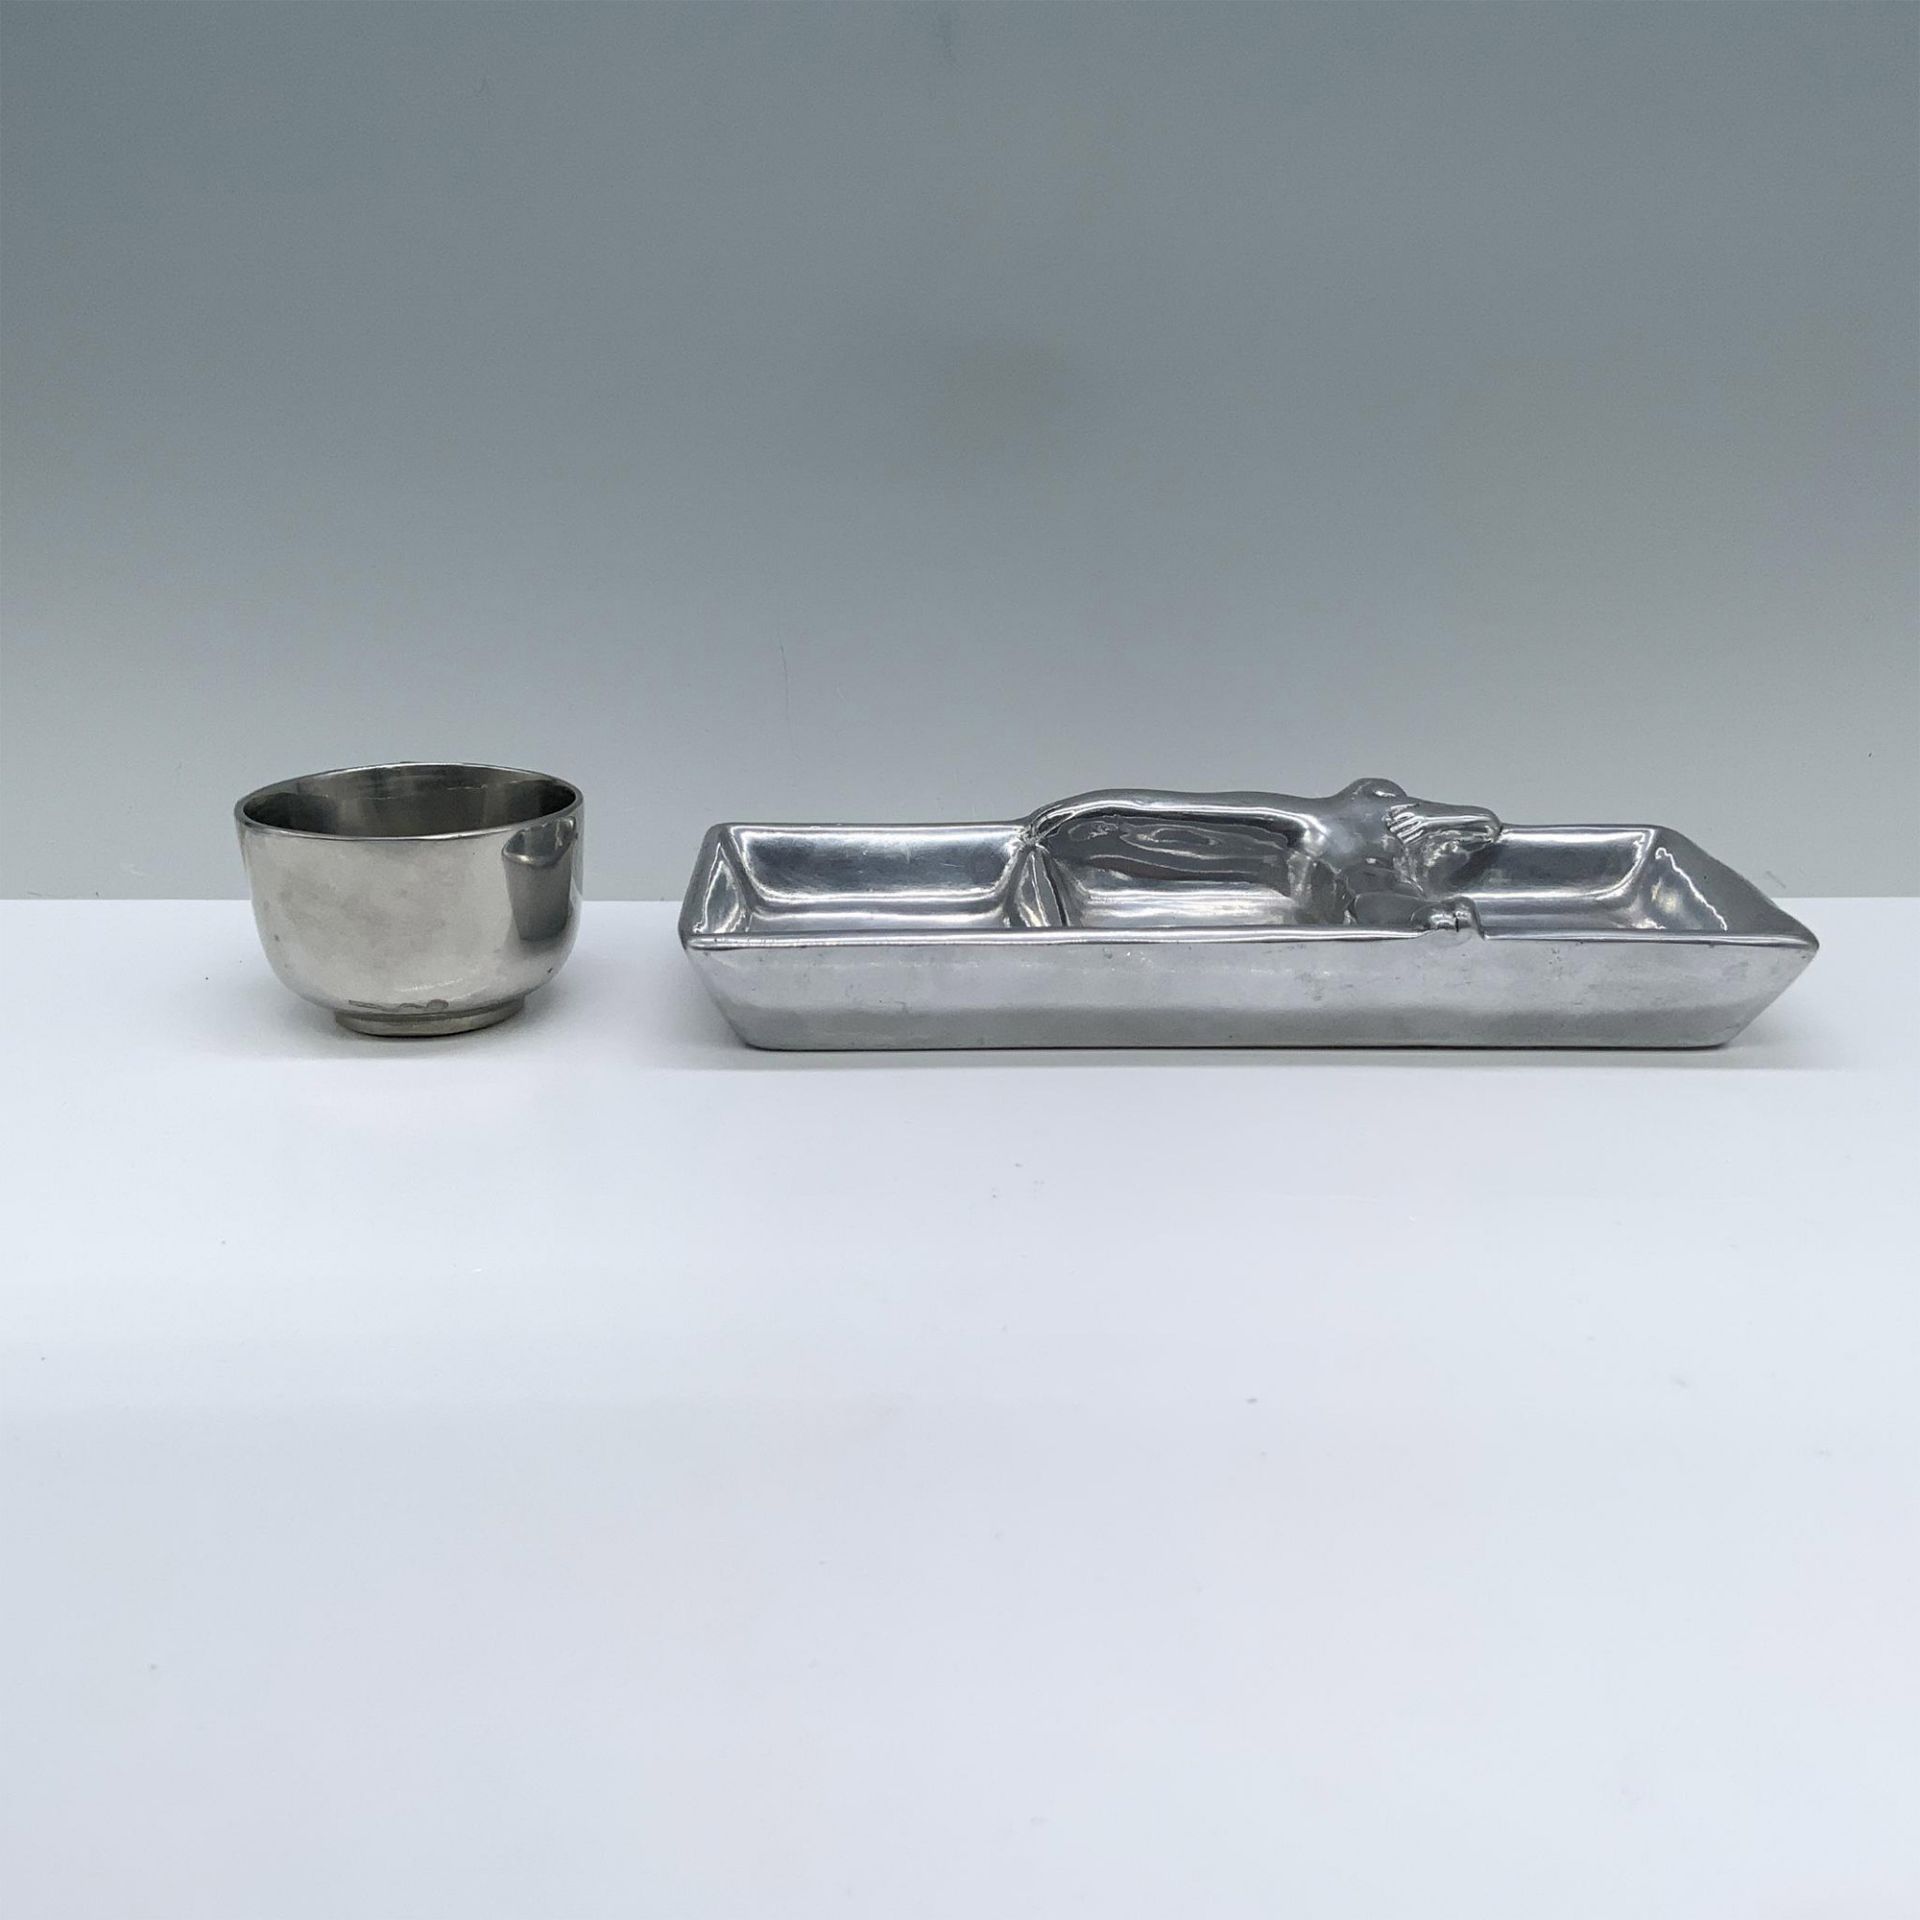 2pc Carrol Boyes Aluminum Serving Tray and Bowl - Image 3 of 3